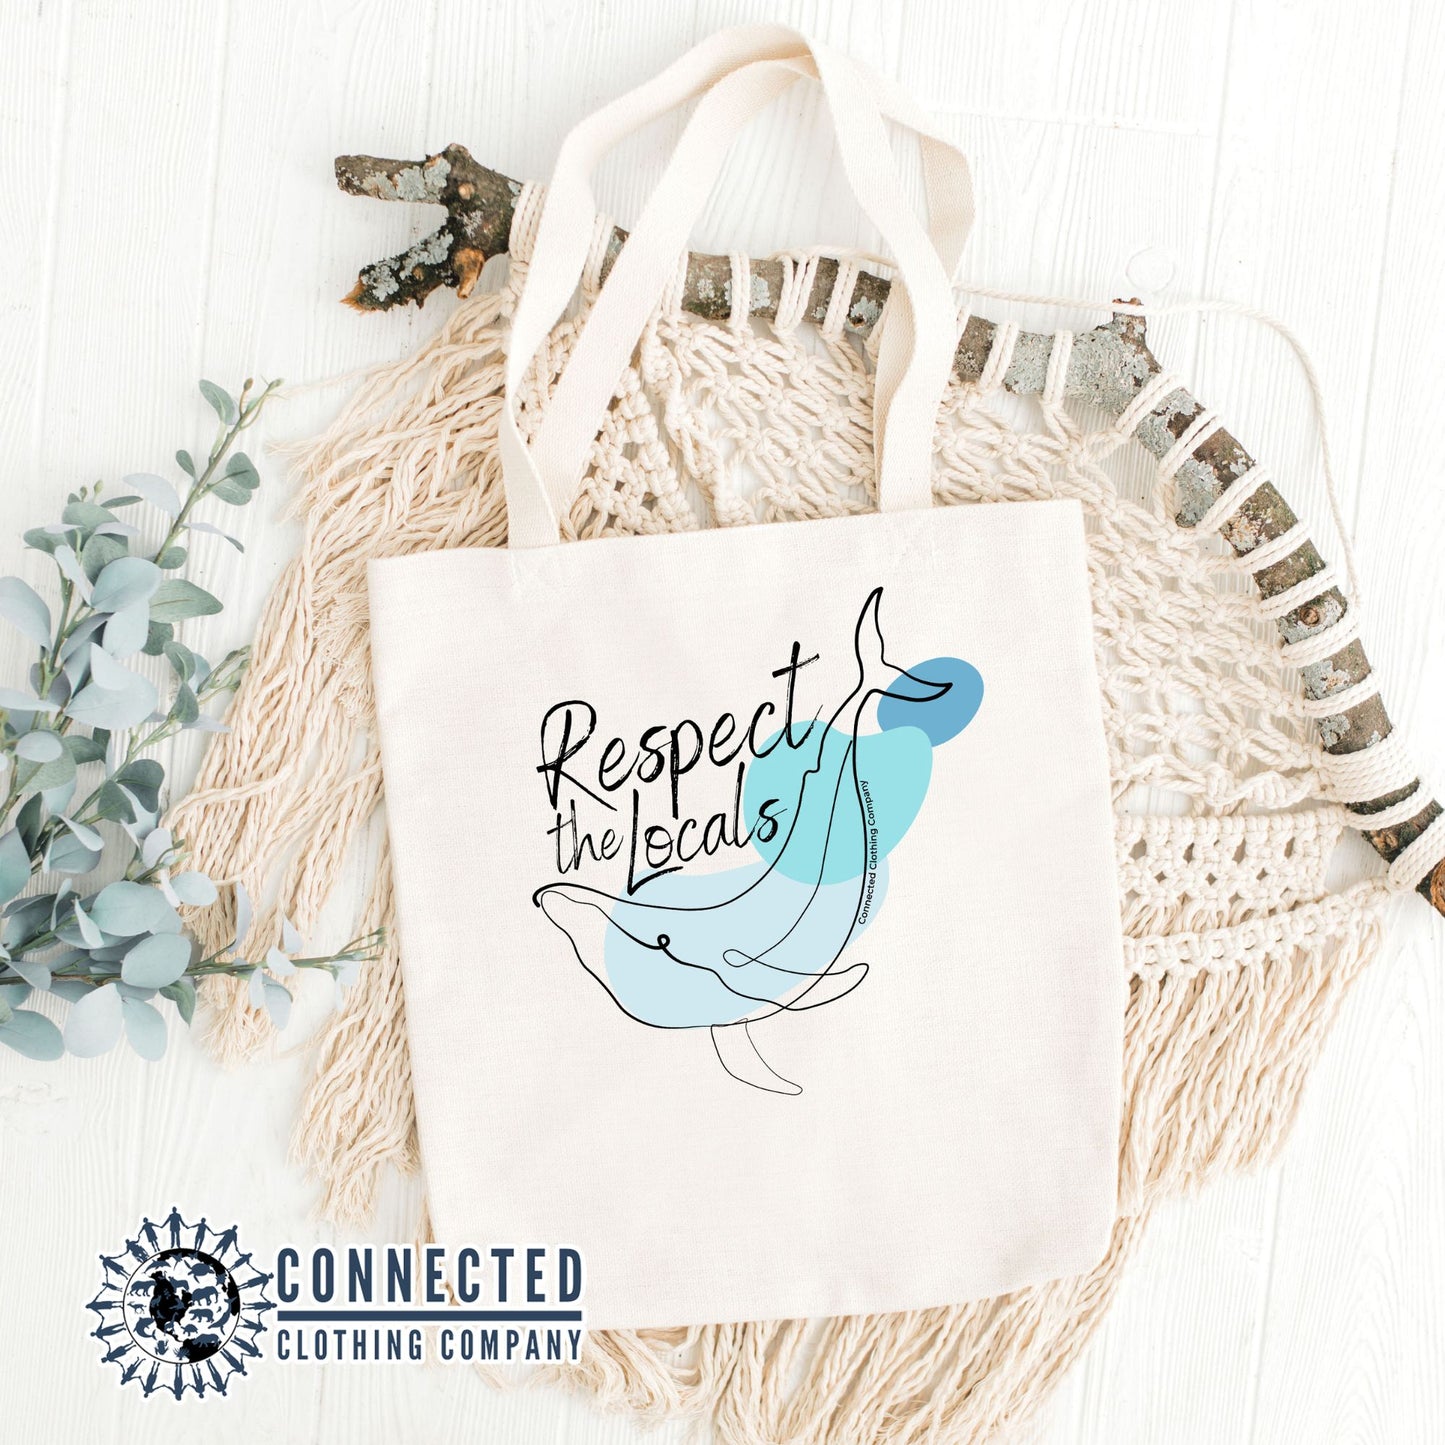 Respect The Locals Whale Tote Bag - Connected Clothing Company - 10% of proceeds donated to ocean conservation